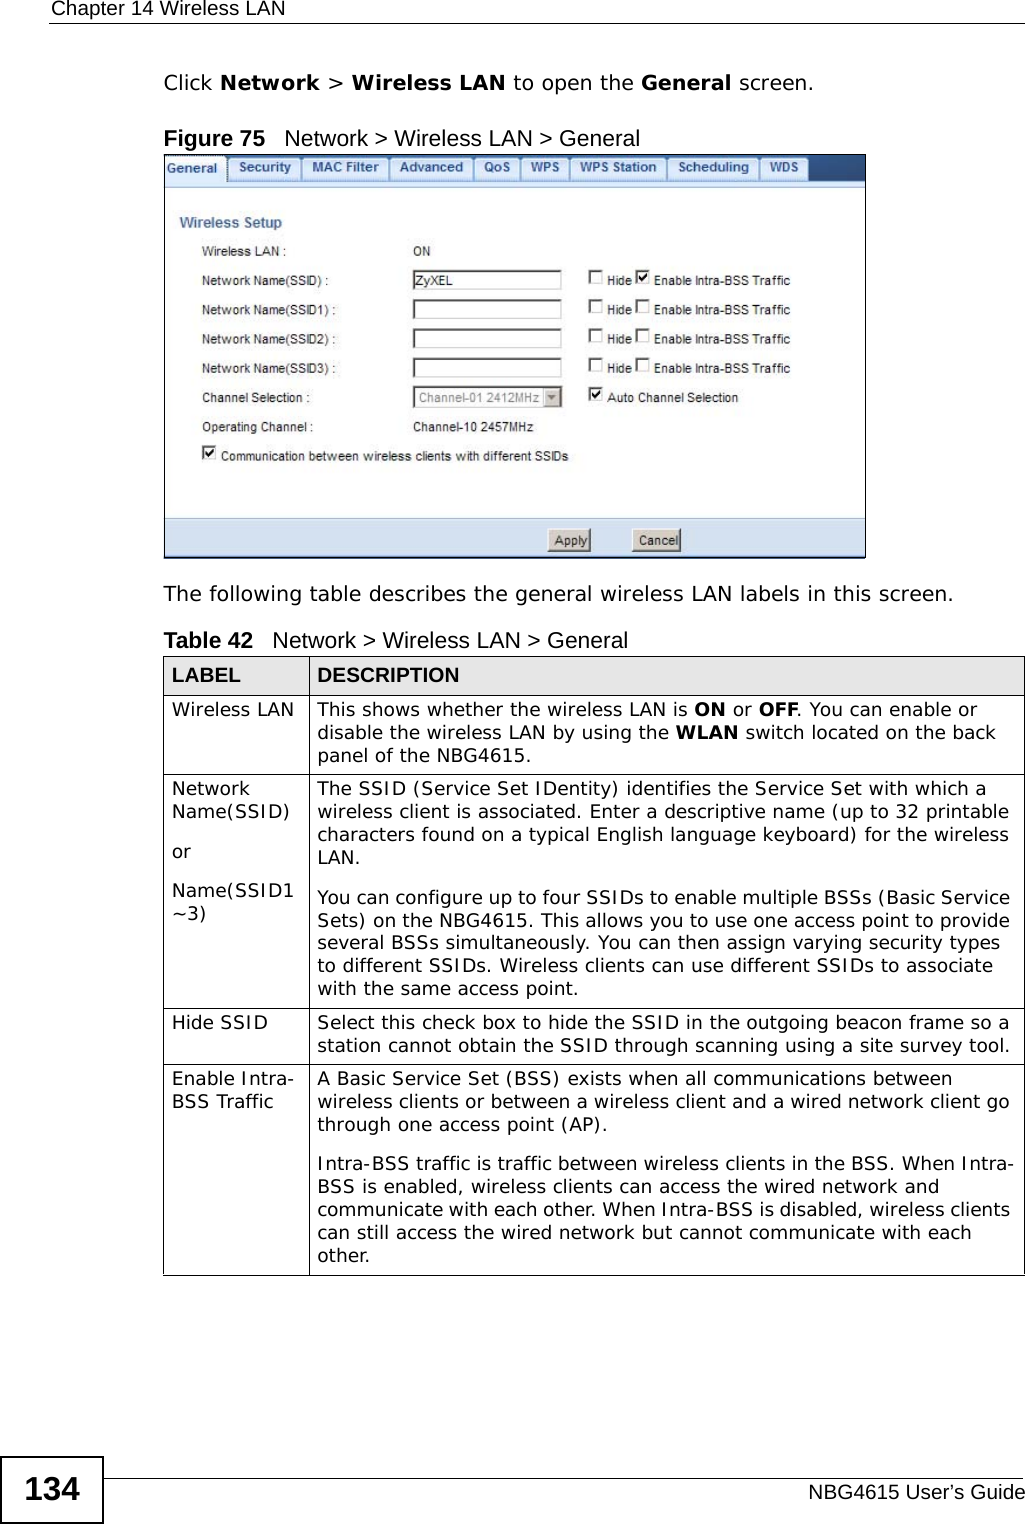 Chapter 14 Wireless LANNBG4615 User’s Guide134Click Network &gt; Wireless LAN to open the General screen.Figure 75   Network &gt; Wireless LAN &gt; General The following table describes the general wireless LAN labels in this screen.Table 42   Network &gt; Wireless LAN &gt; GeneralLABEL DESCRIPTIONWireless LAN This shows whether the wireless LAN is ON or OFF. You can enable or disable the wireless LAN by using the WLAN switch located on the back panel of the NBG4615.Network Name(SSID)orName(SSID1~3) The SSID (Service Set IDentity) identifies the Service Set with which a wireless client is associated. Enter a descriptive name (up to 32 printable characters found on a typical English language keyboard) for the wireless LAN. You can configure up to four SSIDs to enable multiple BSSs (Basic Service Sets) on the NBG4615. This allows you to use one access point to provide several BSSs simultaneously. You can then assign varying security types to different SSIDs. Wireless clients can use different SSIDs to associate with the same access point.Hide SSID Select this check box to hide the SSID in the outgoing beacon frame so a station cannot obtain the SSID through scanning using a site survey tool.Enable Intra-BSS Traffic A Basic Service Set (BSS) exists when all communications between wireless clients or between a wireless client and a wired network client go through one access point (AP). Intra-BSS traffic is traffic between wireless clients in the BSS. When Intra-BSS is enabled, wireless clients can access the wired network and communicate with each other. When Intra-BSS is disabled, wireless clients can still access the wired network but cannot communicate with each other.